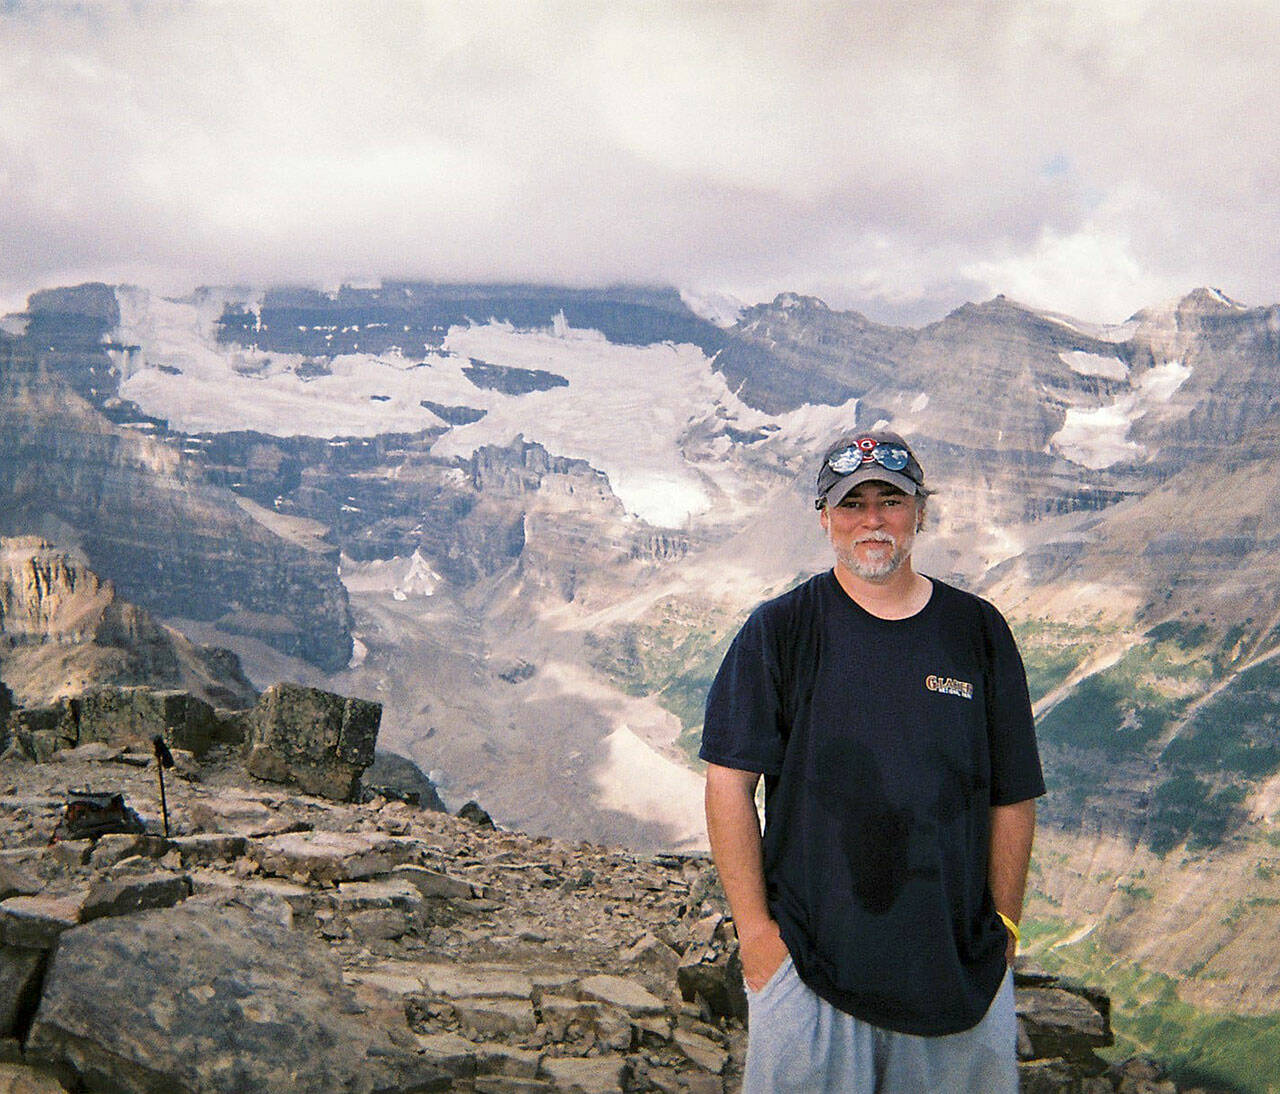 Pierre LaBossiere on top of 9,000-foot Fairview Summit in Banff National Park, Alberta in 2008.